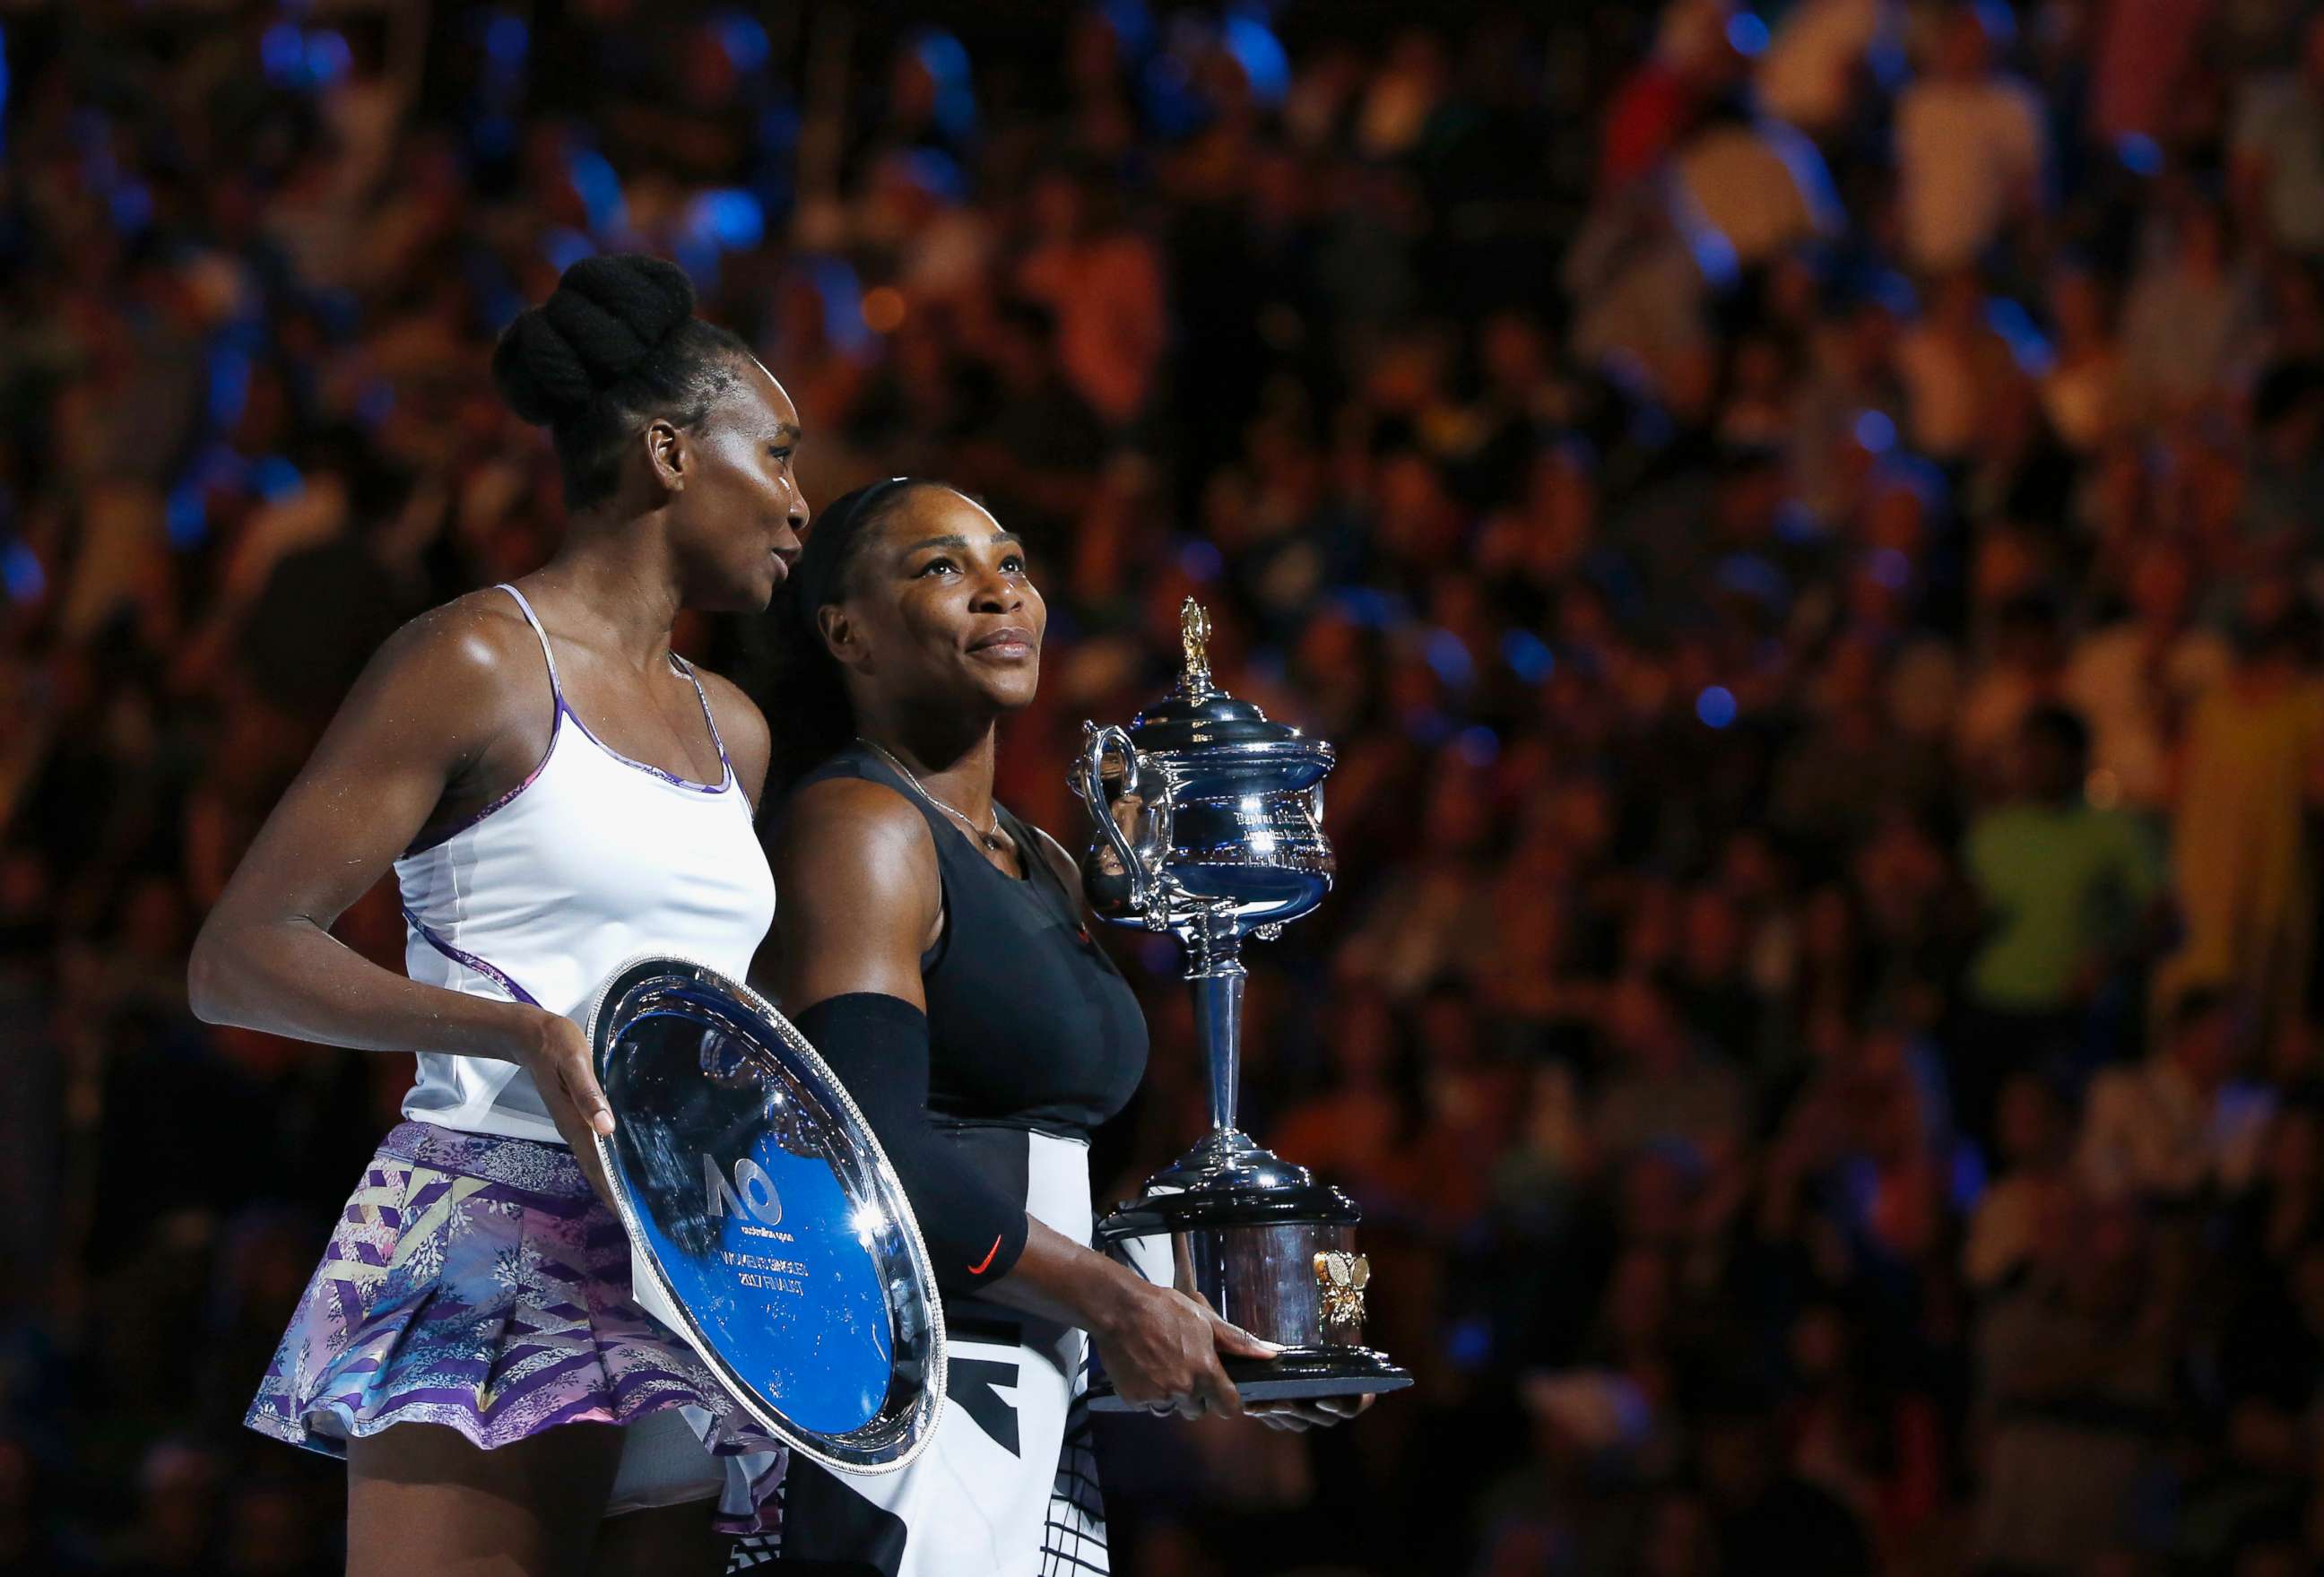 PHOTO: Serena Williams holds her trophy after winning her Women's singles final match against Venus Williams in Melbourne, Australia, Jan. 28, 2017.